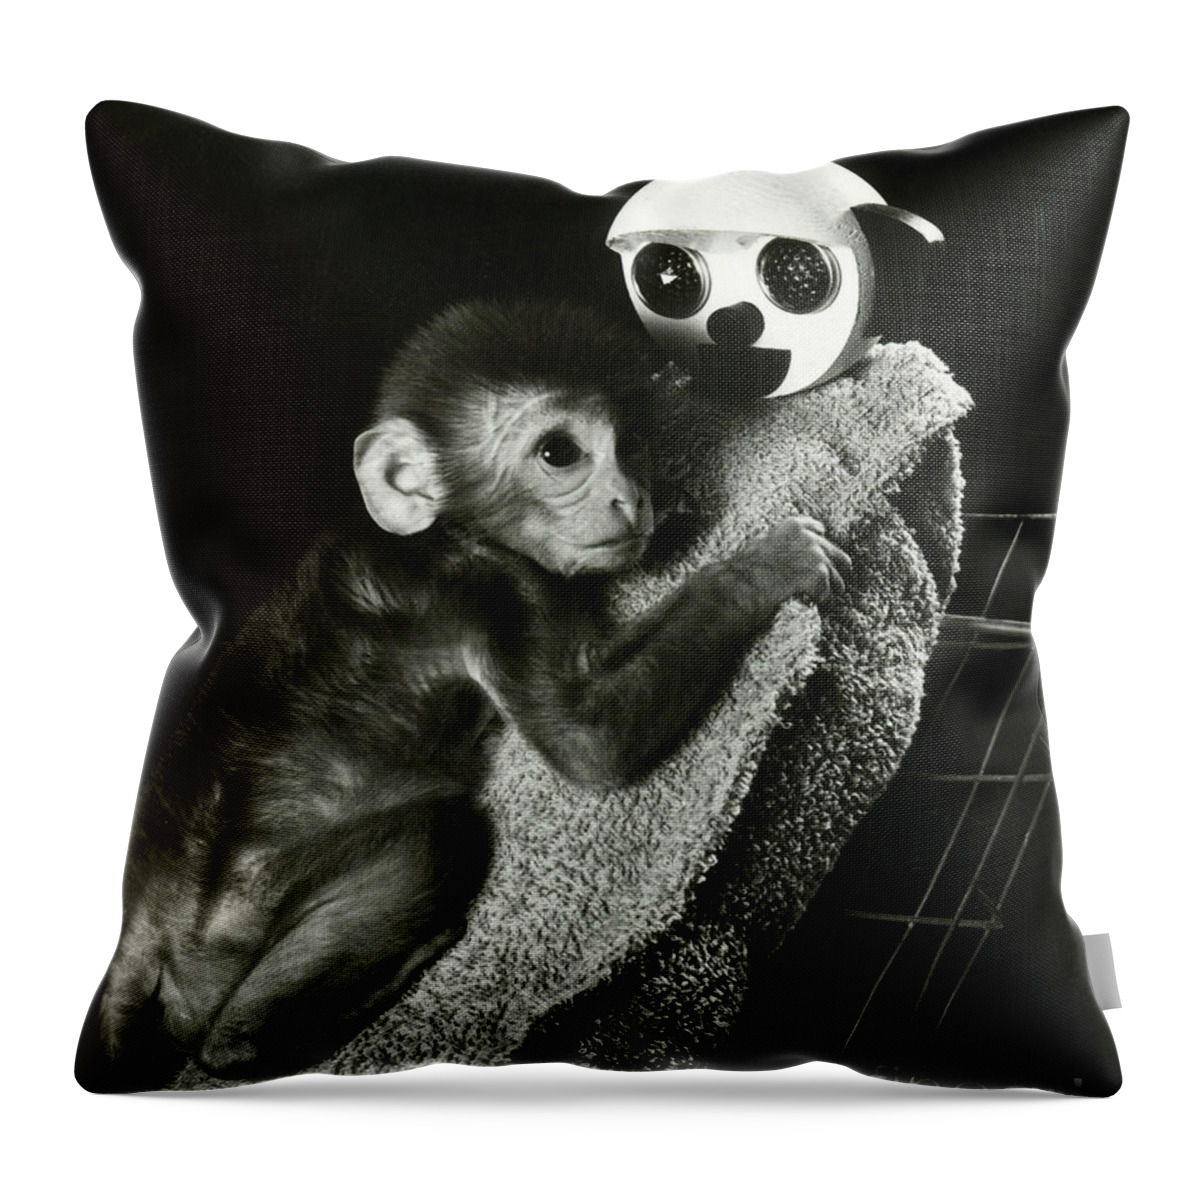 Animal Research Throw Pillow featuring the photograph Monkey Research by Photo Researchers, Inc.